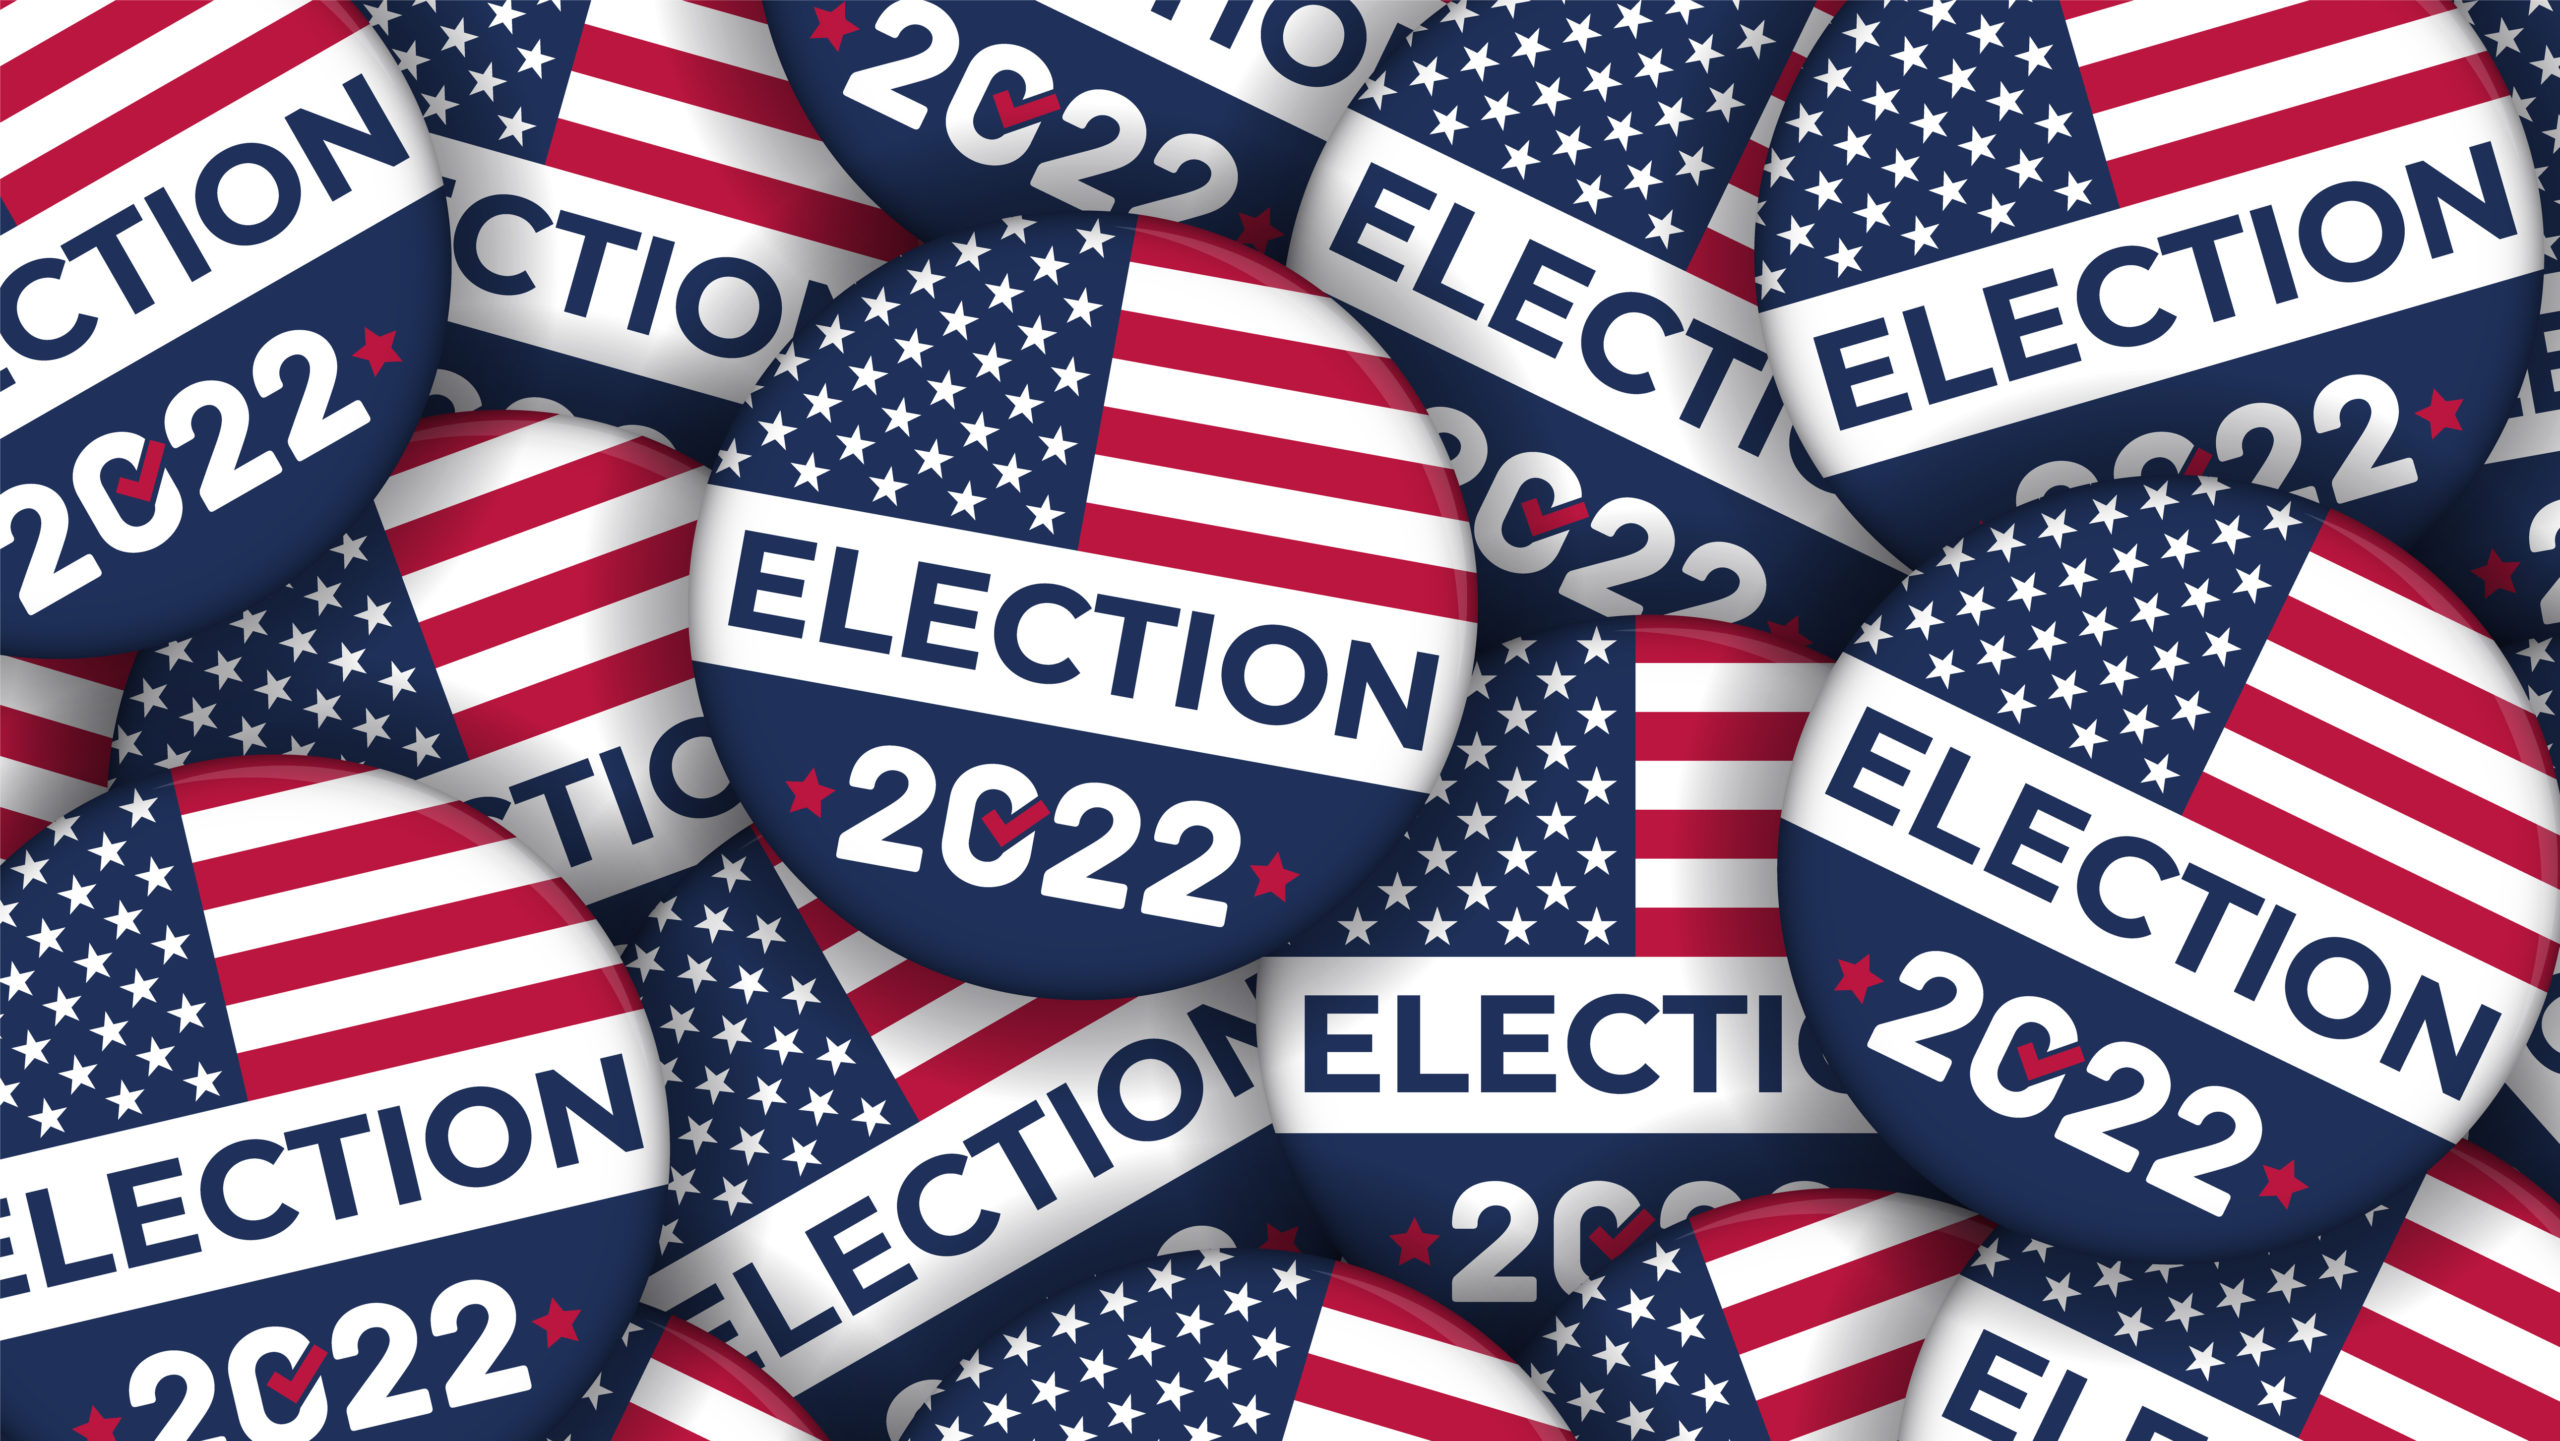 Election 2022 patriotic buttons

AdobeStock_478306434-scaled.jpeg